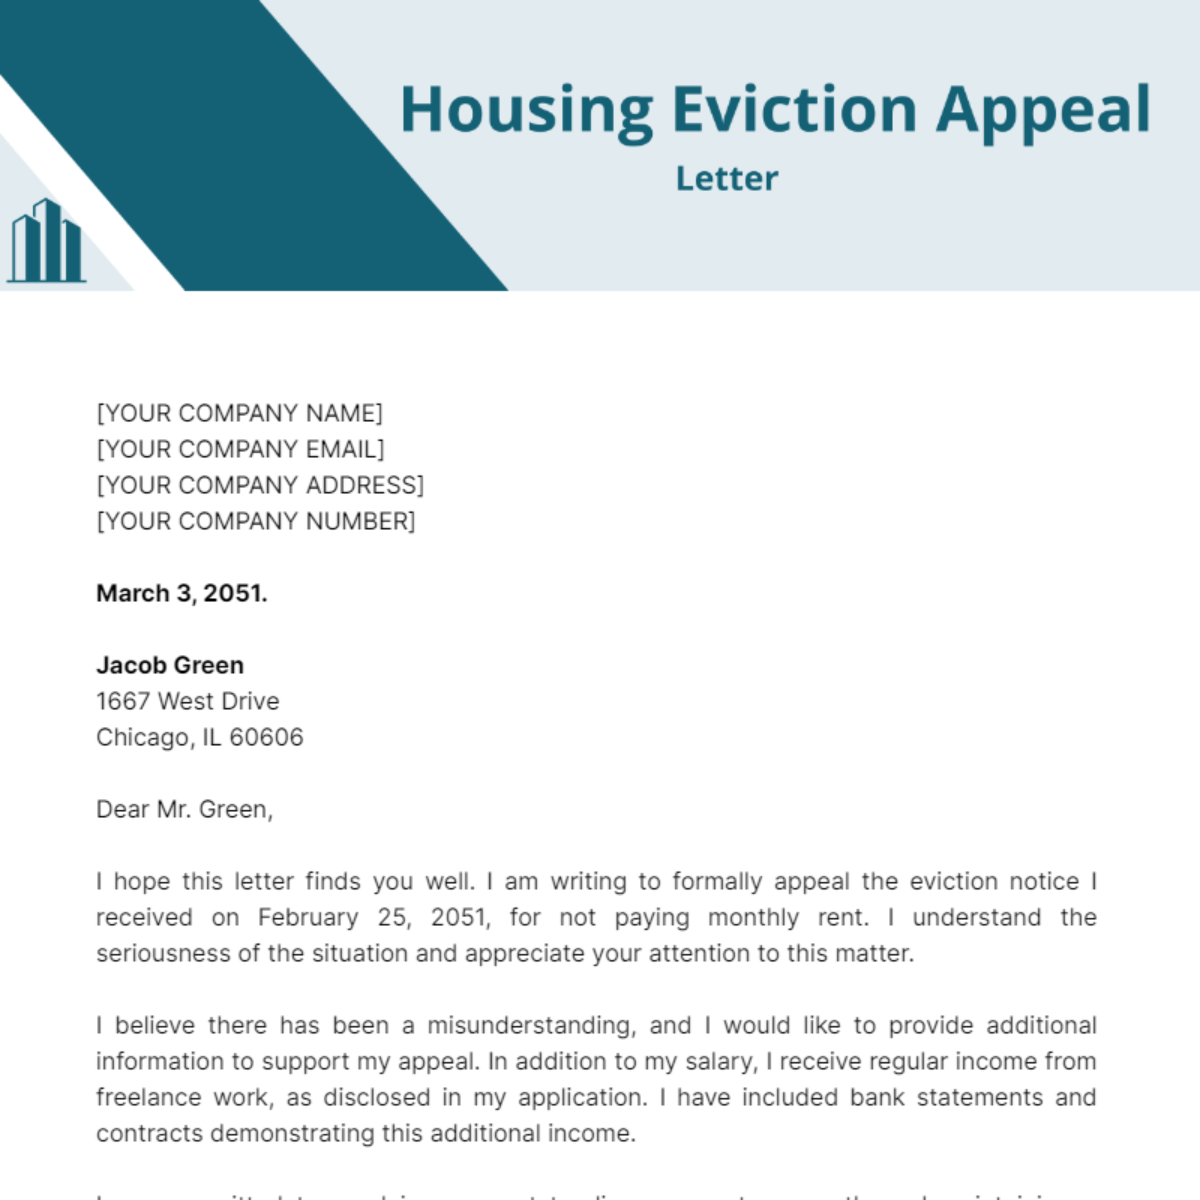 Housing Eviction Appeal Letter Template